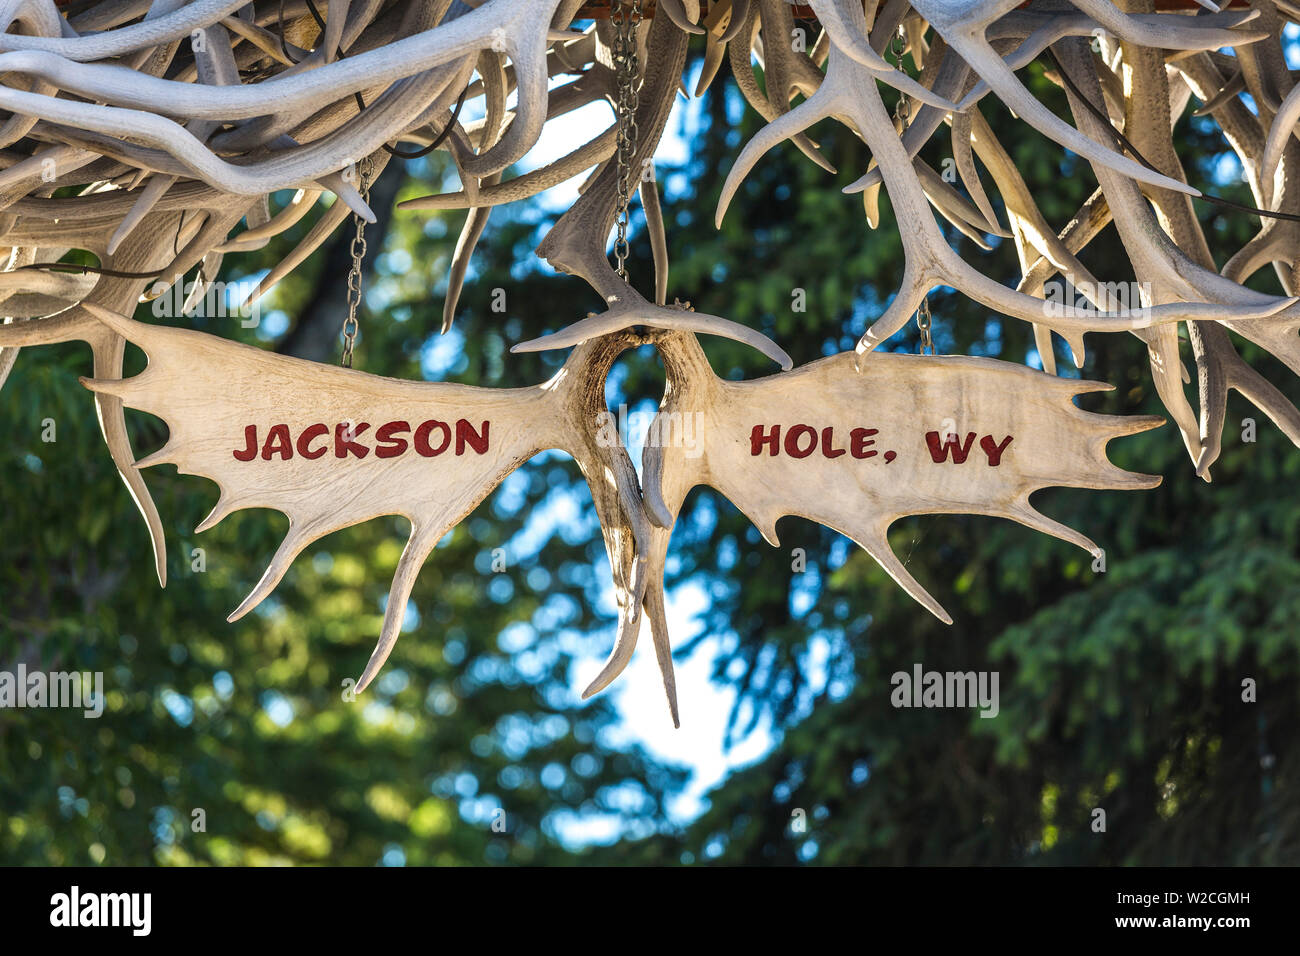 Park gate made with elks antlers, Jackson Hole, Wyoming, USA Stock Photo